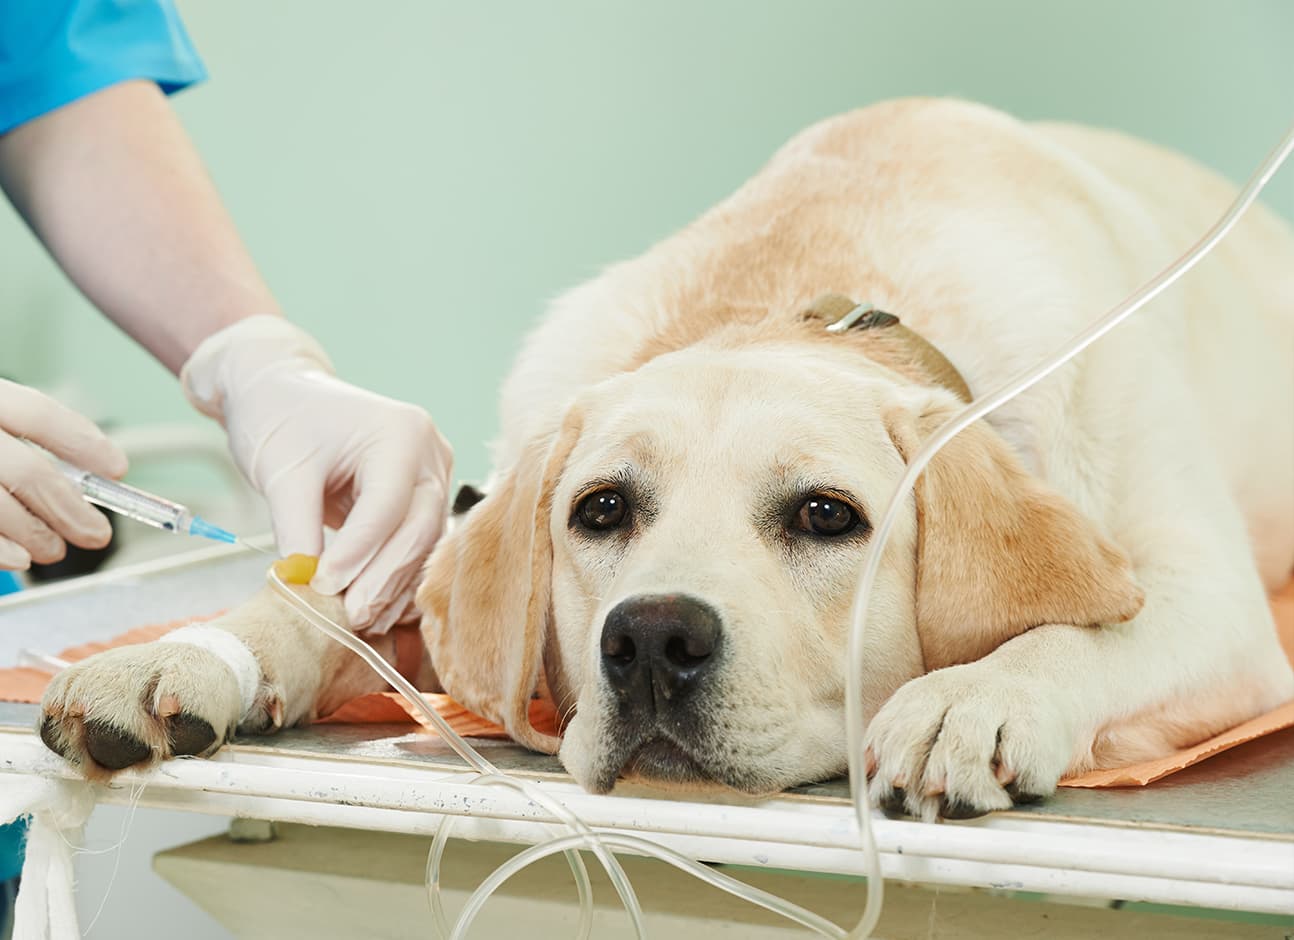 LIVER SHUNT IN DOGS